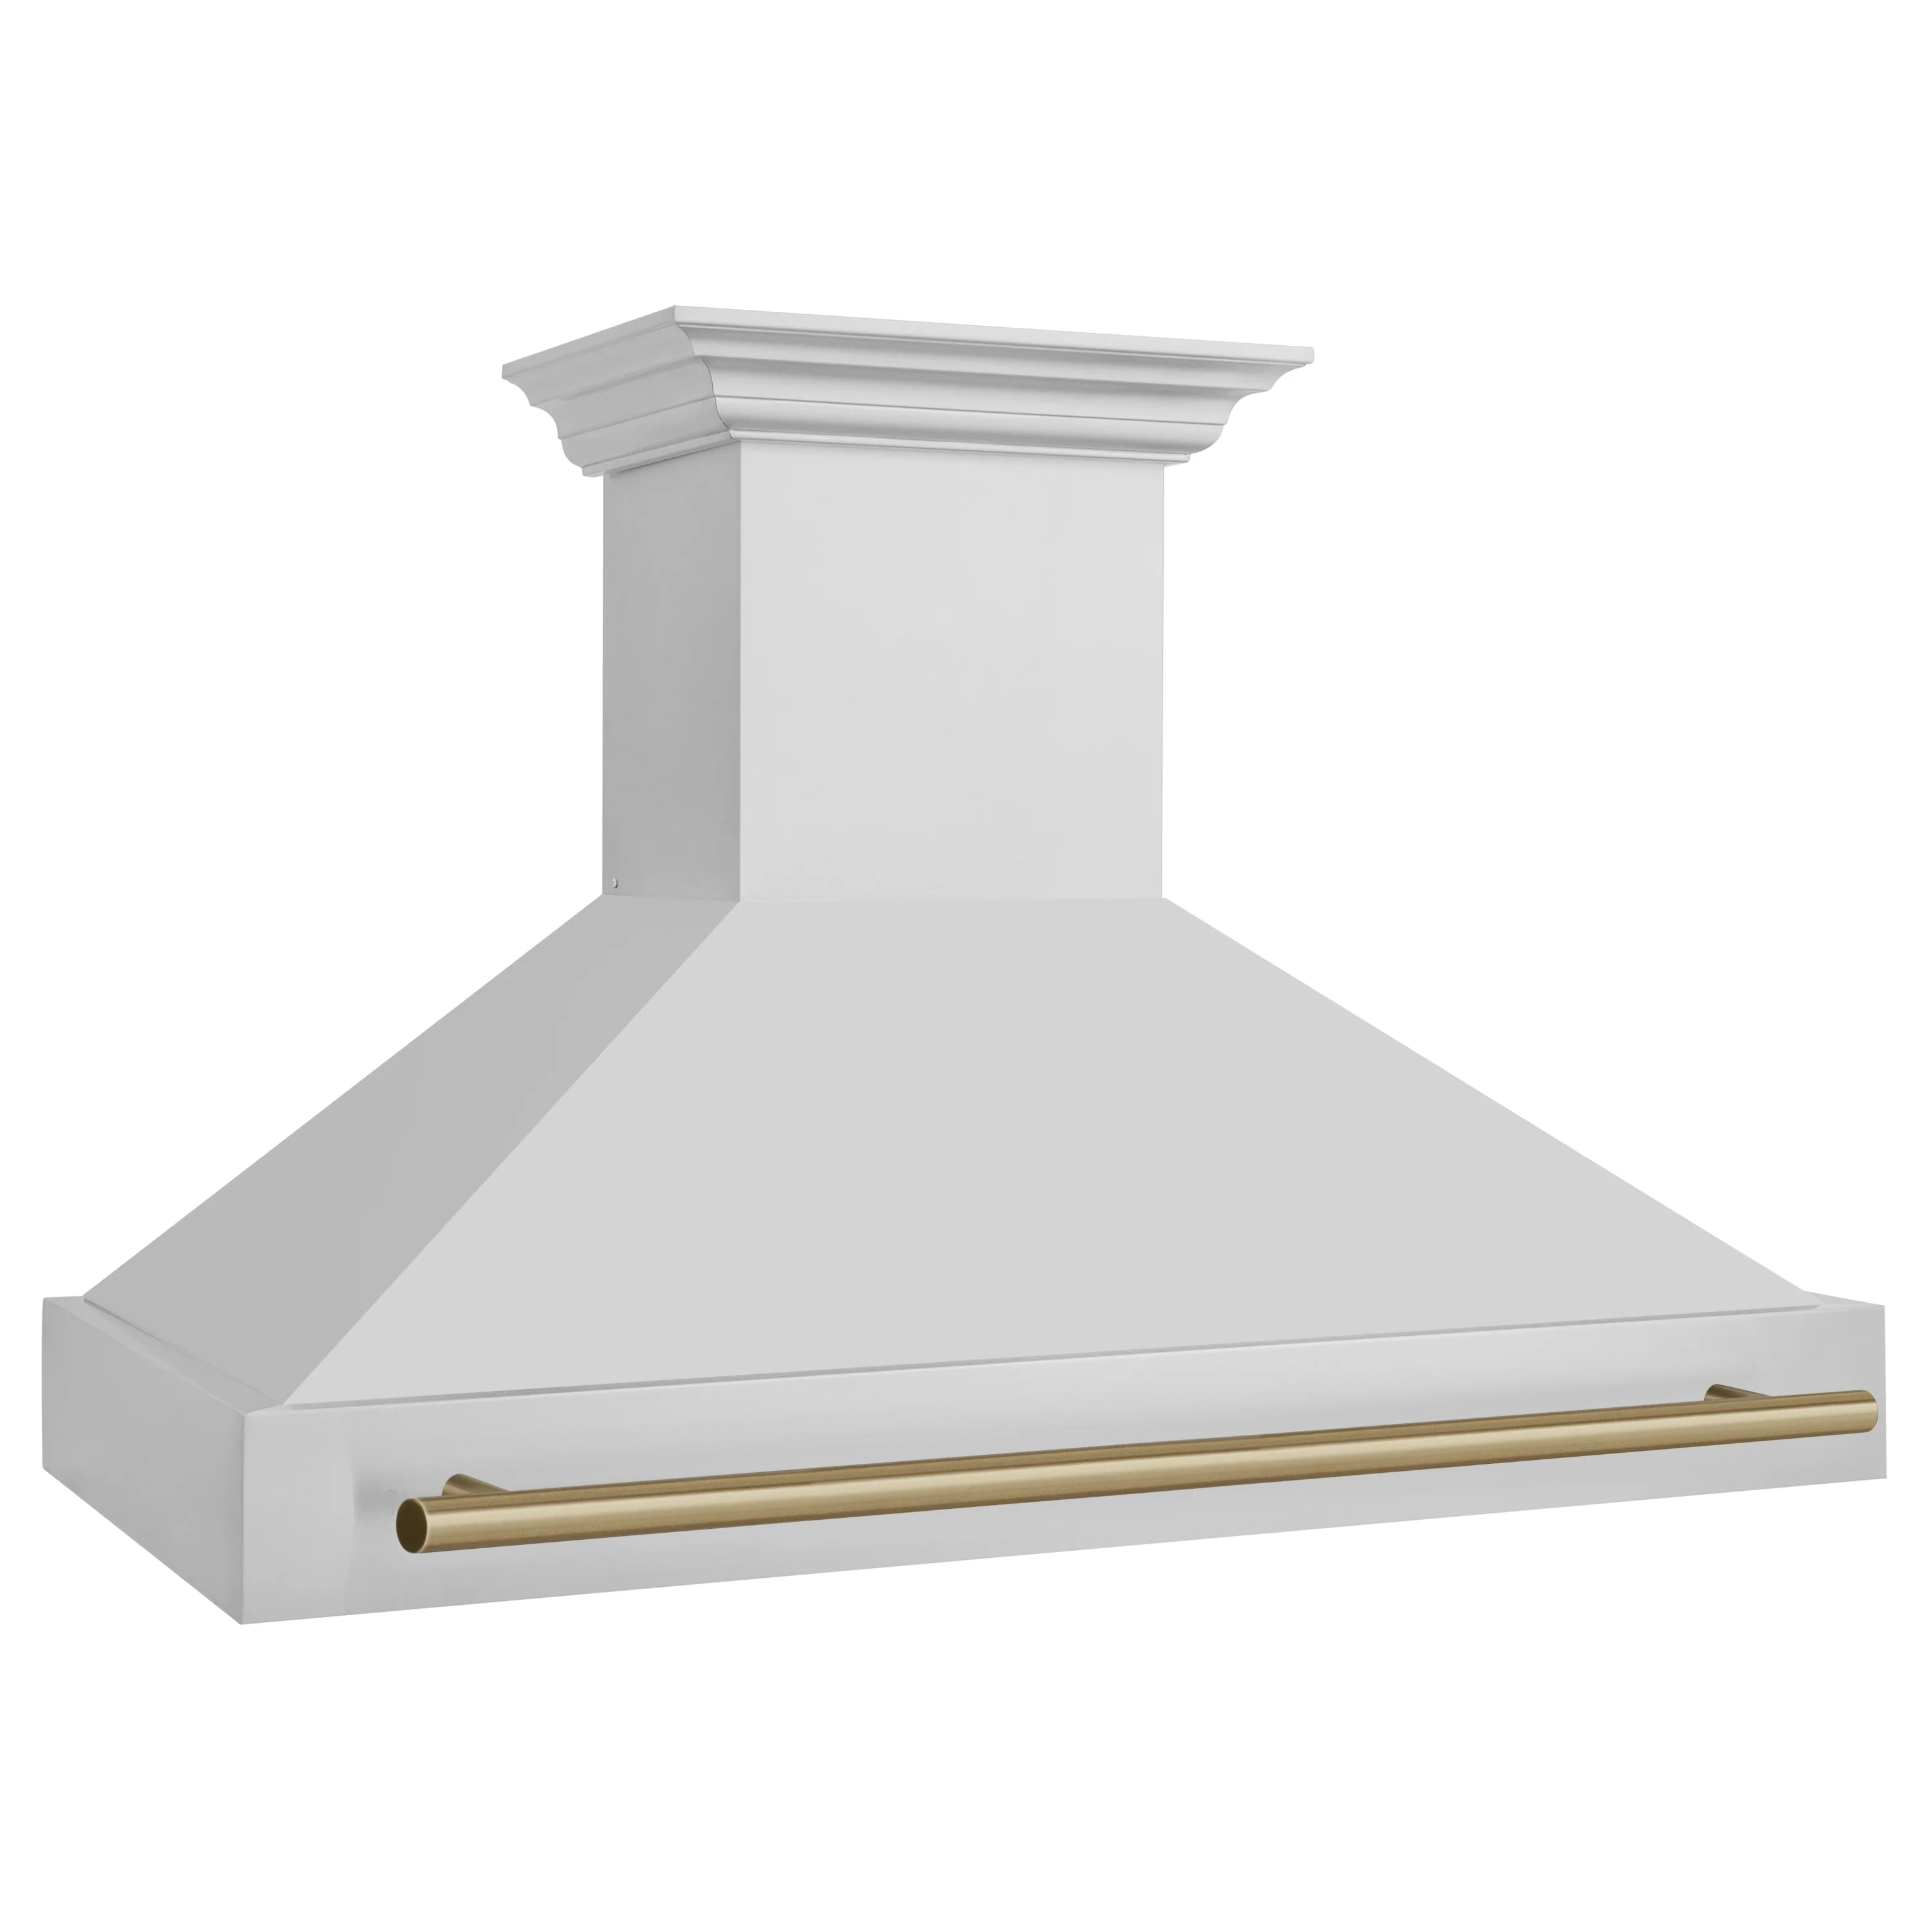 ZLINE 48 Inch Autograph Edition Stainless Steel Range Hood with Champagne Bronze Handle, 8654STZ-48-CB